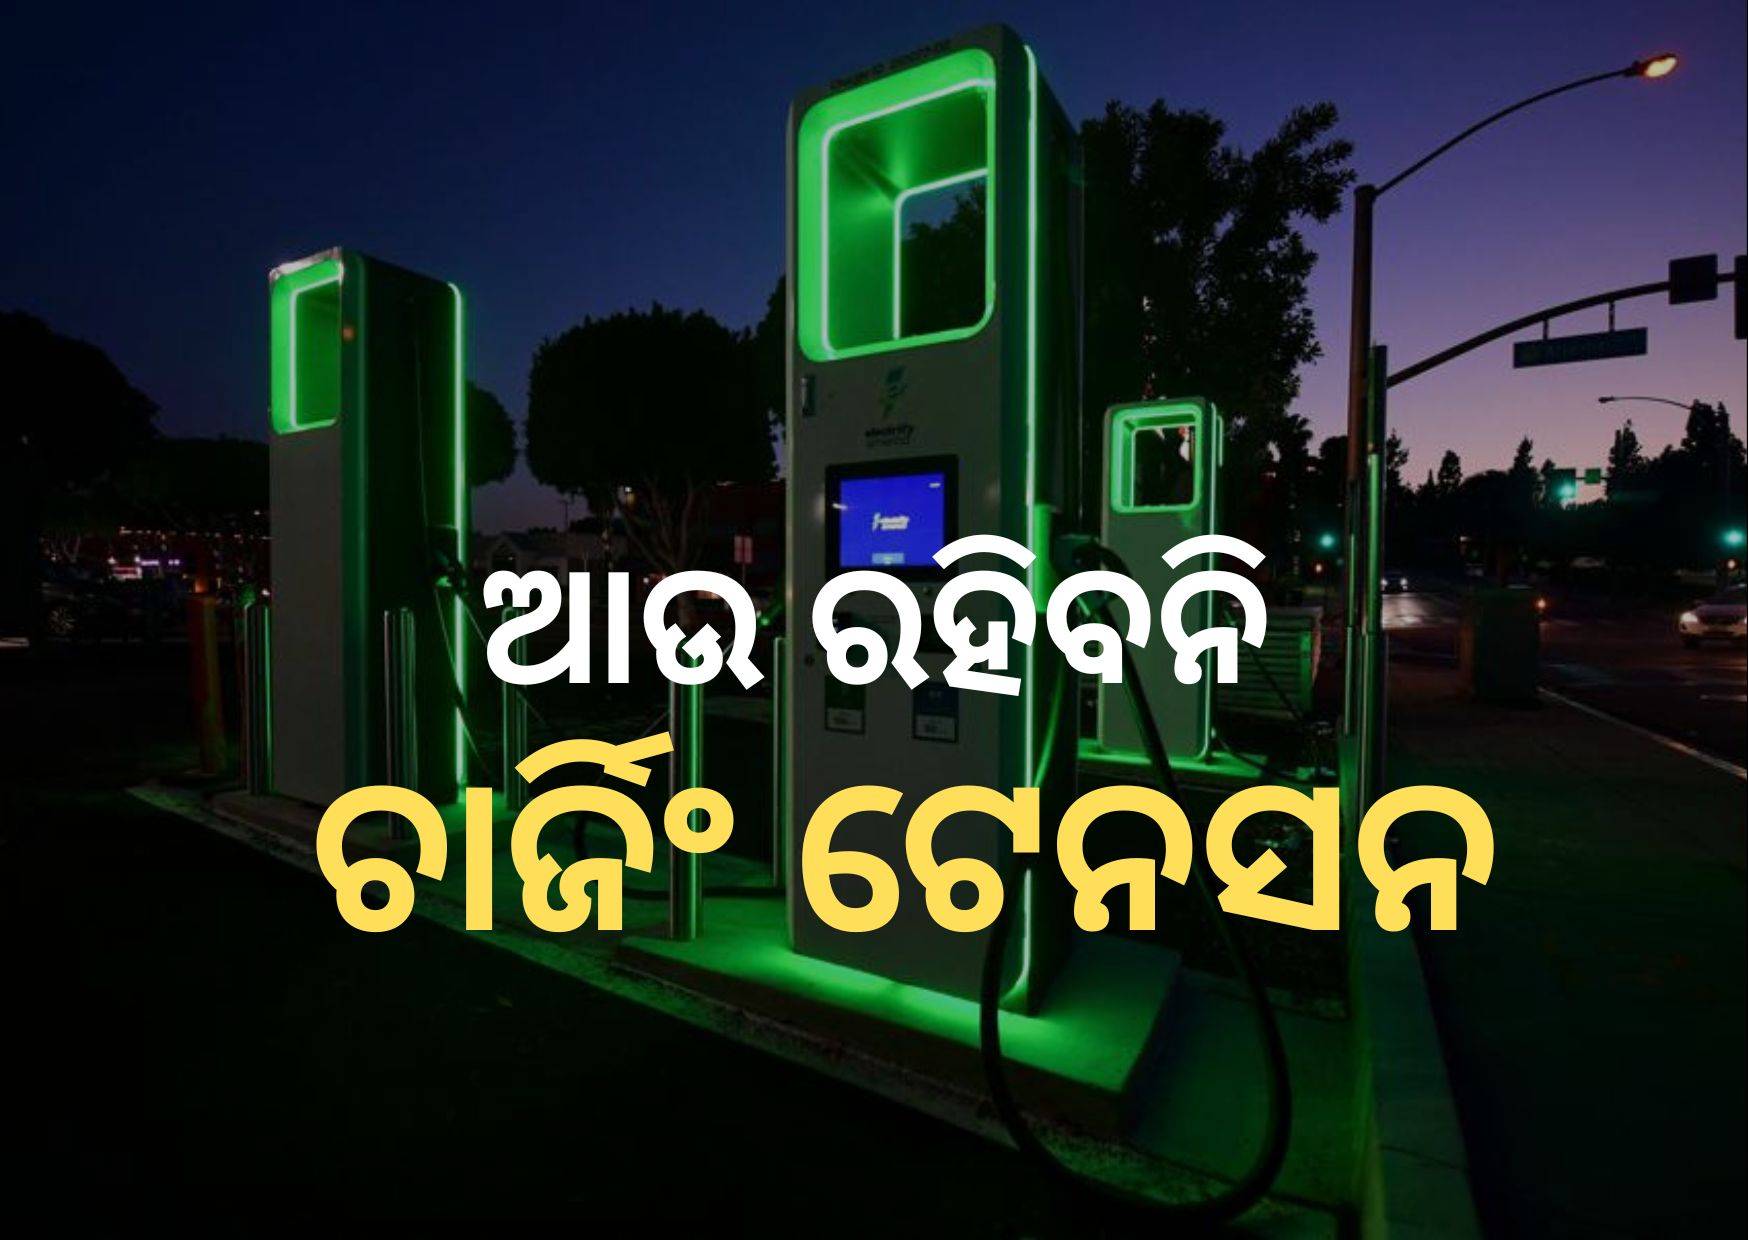 Ministry of Heavy Industries installed ୧୧୮ charging stations in odisha